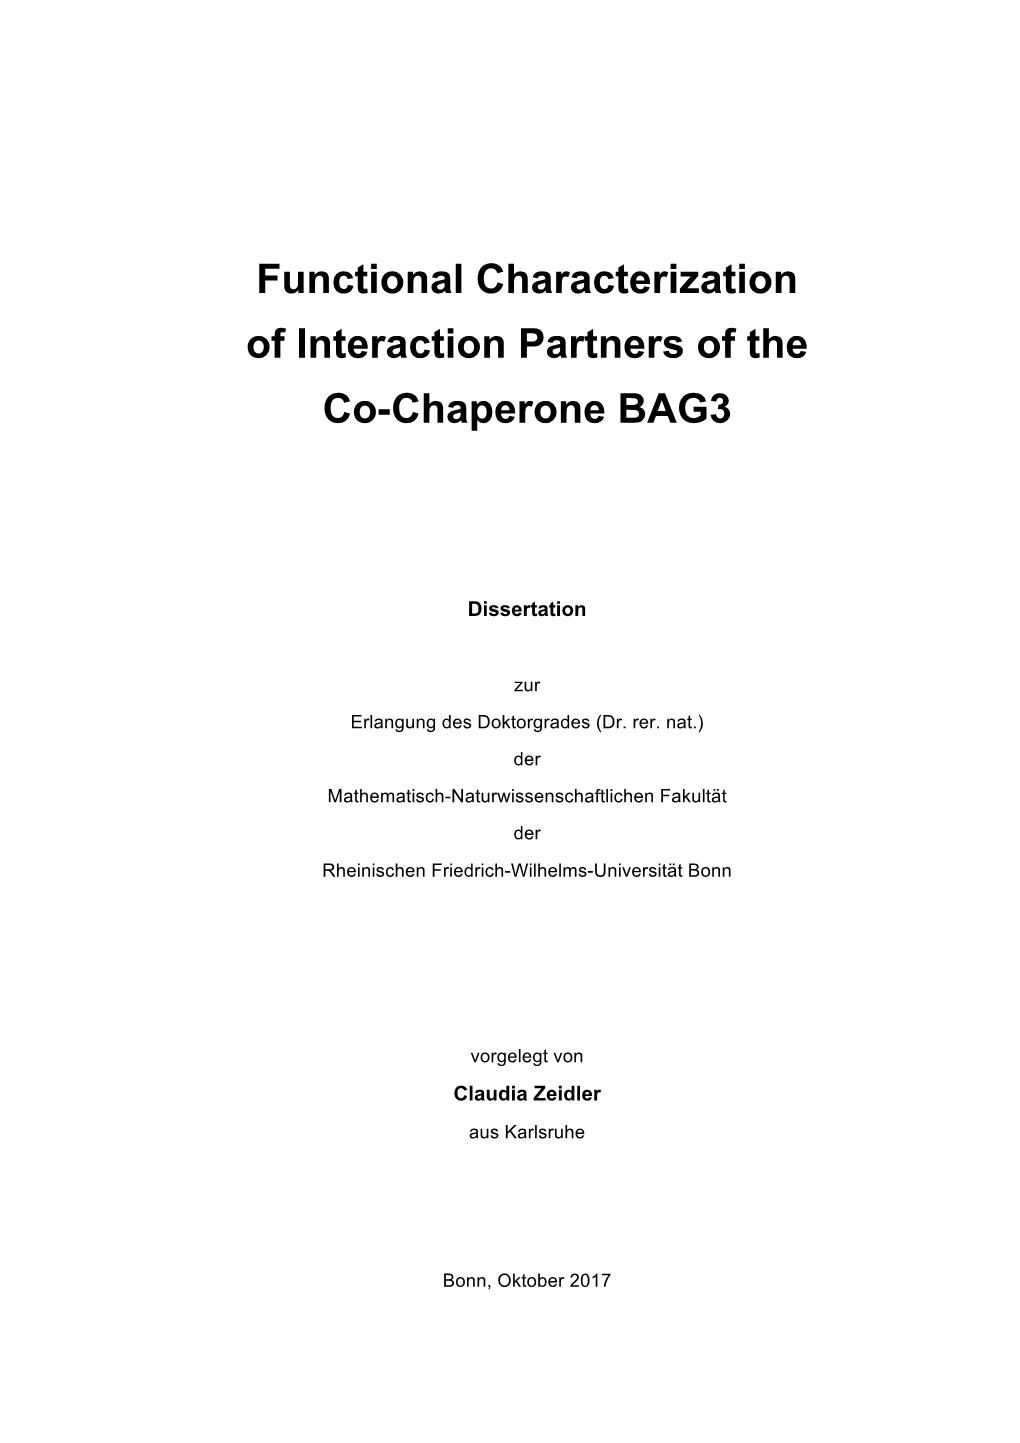 Functional Characterization of Interaction Partners of the Co-Chaperone BAG3